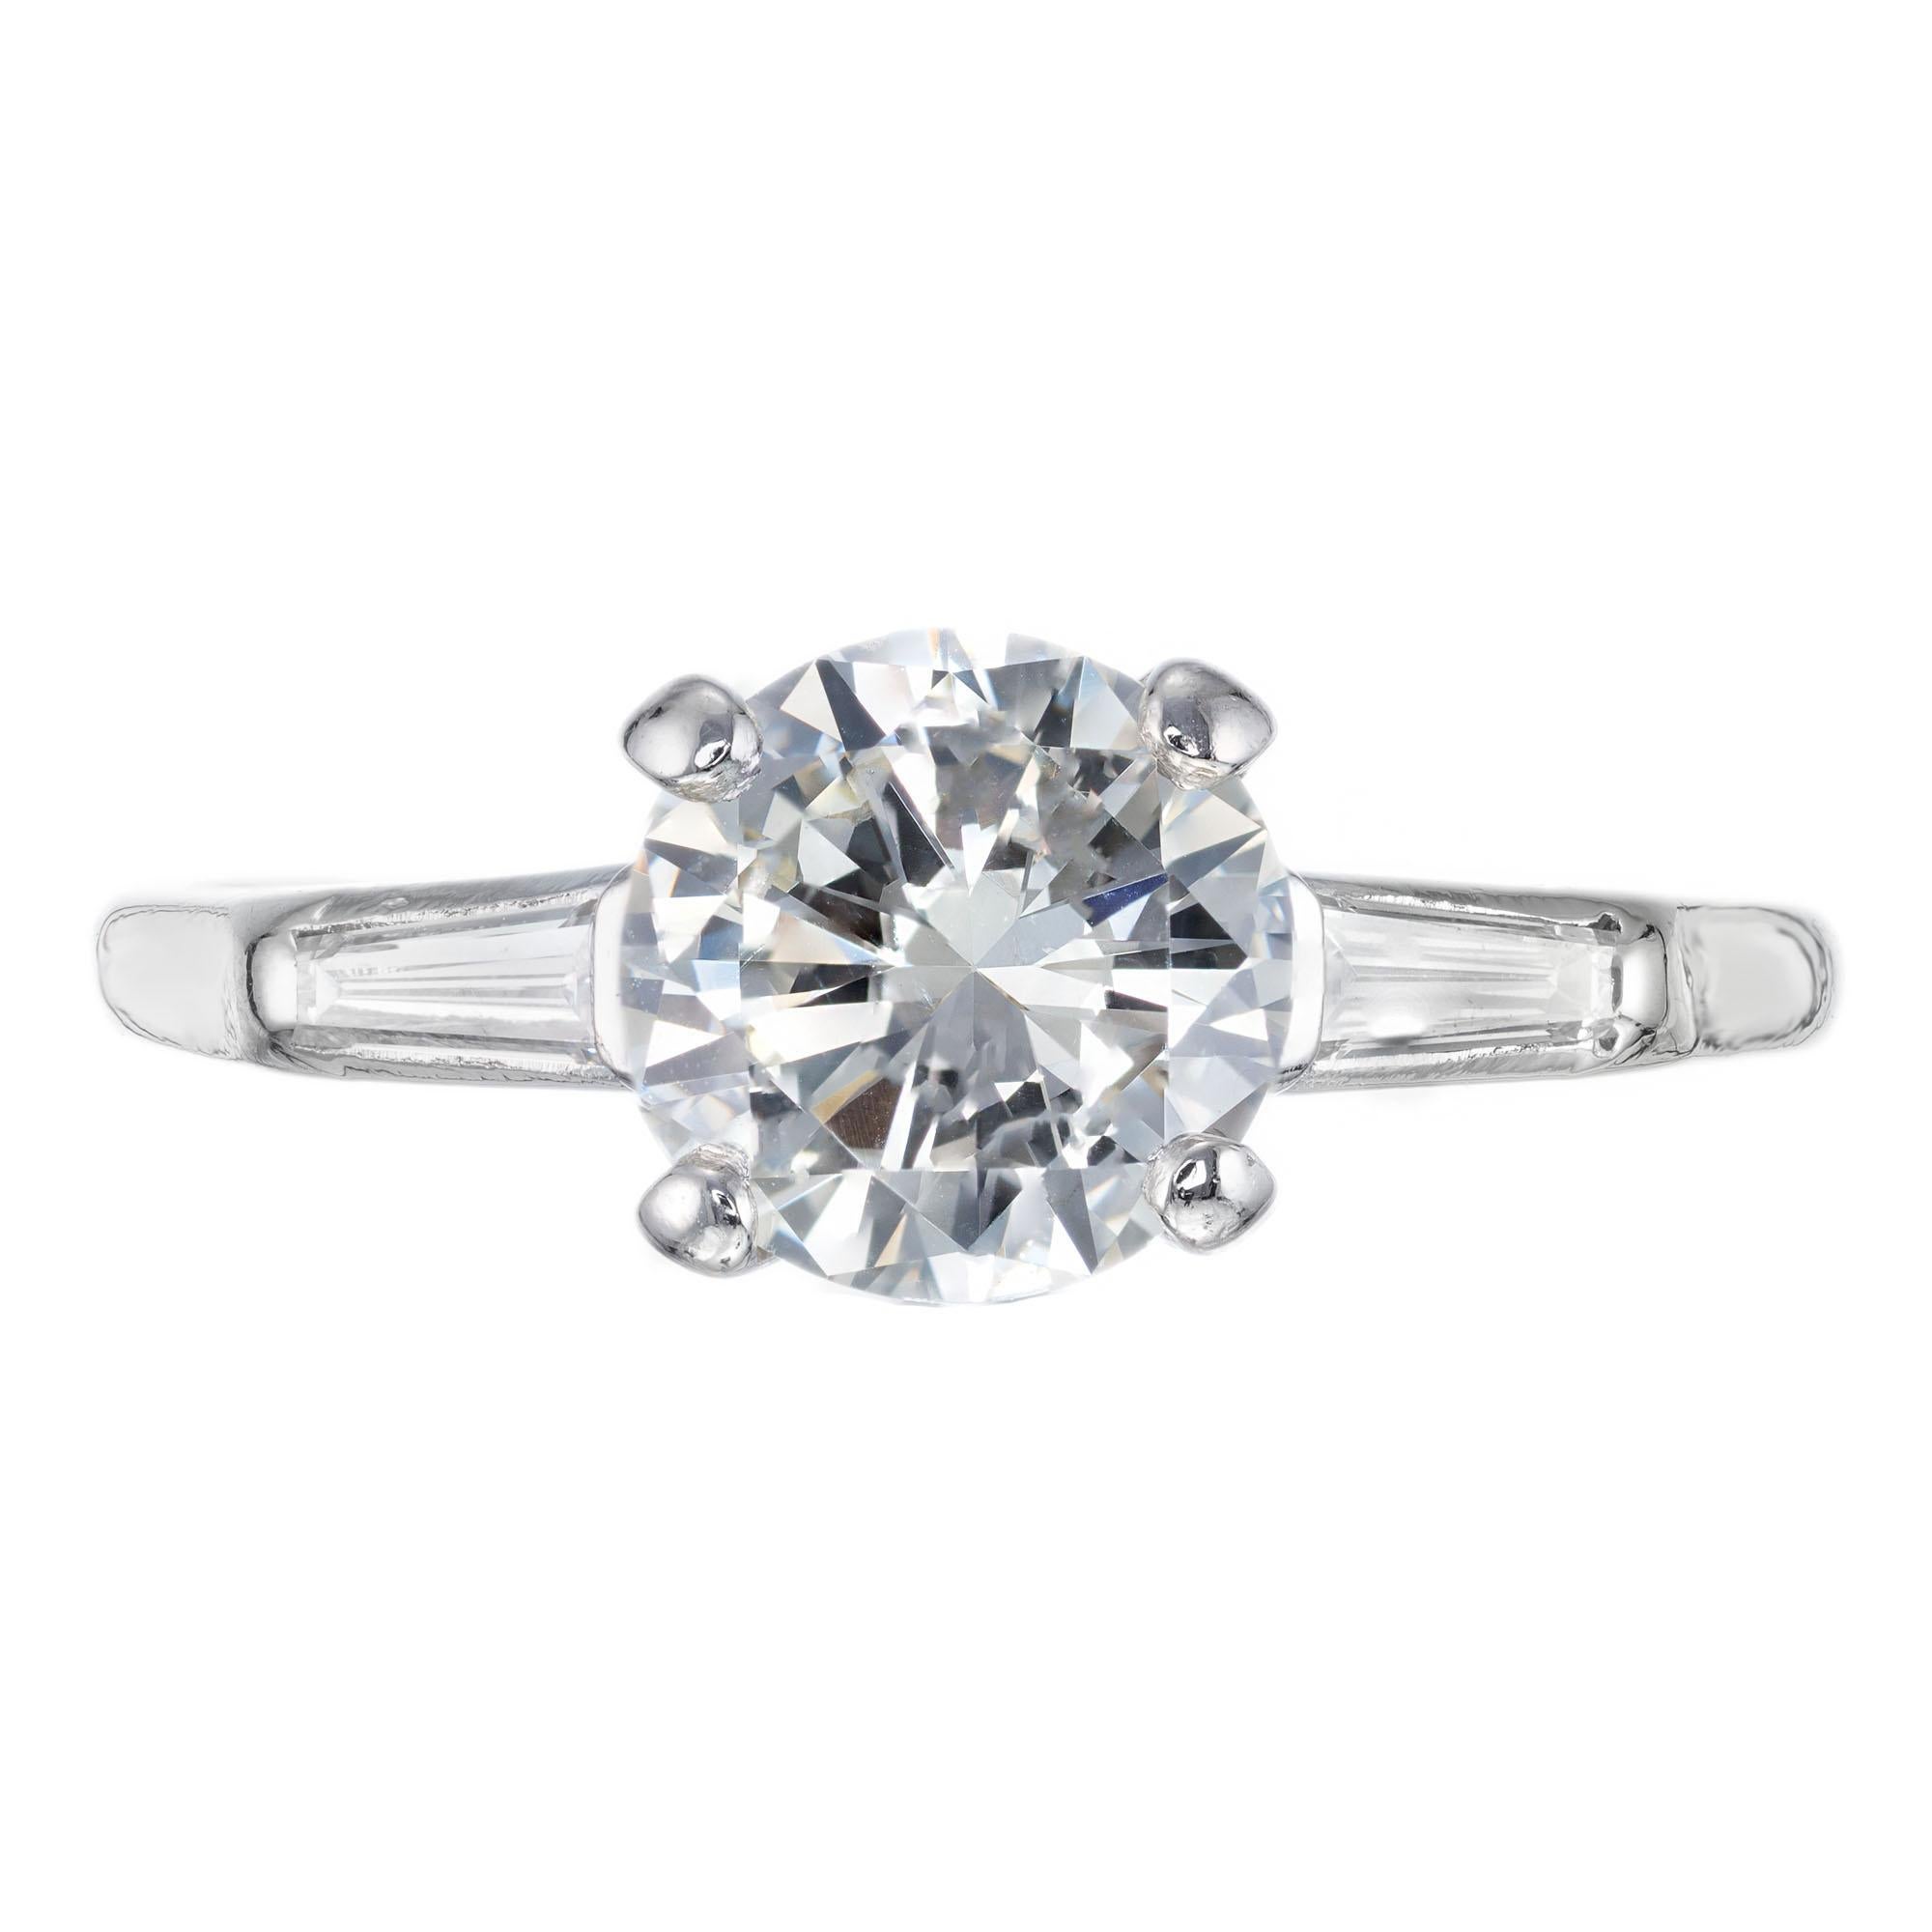 1940's late Art Deco transitional Ideal cut diamond platinum engagement Ring. EGL certified center stone with two baguette side diamonds in a platinum setting. 

1 transitional brilliant cut diamond, approx. total weight 1.52cts, J, SI1, 7.60 x 7.58